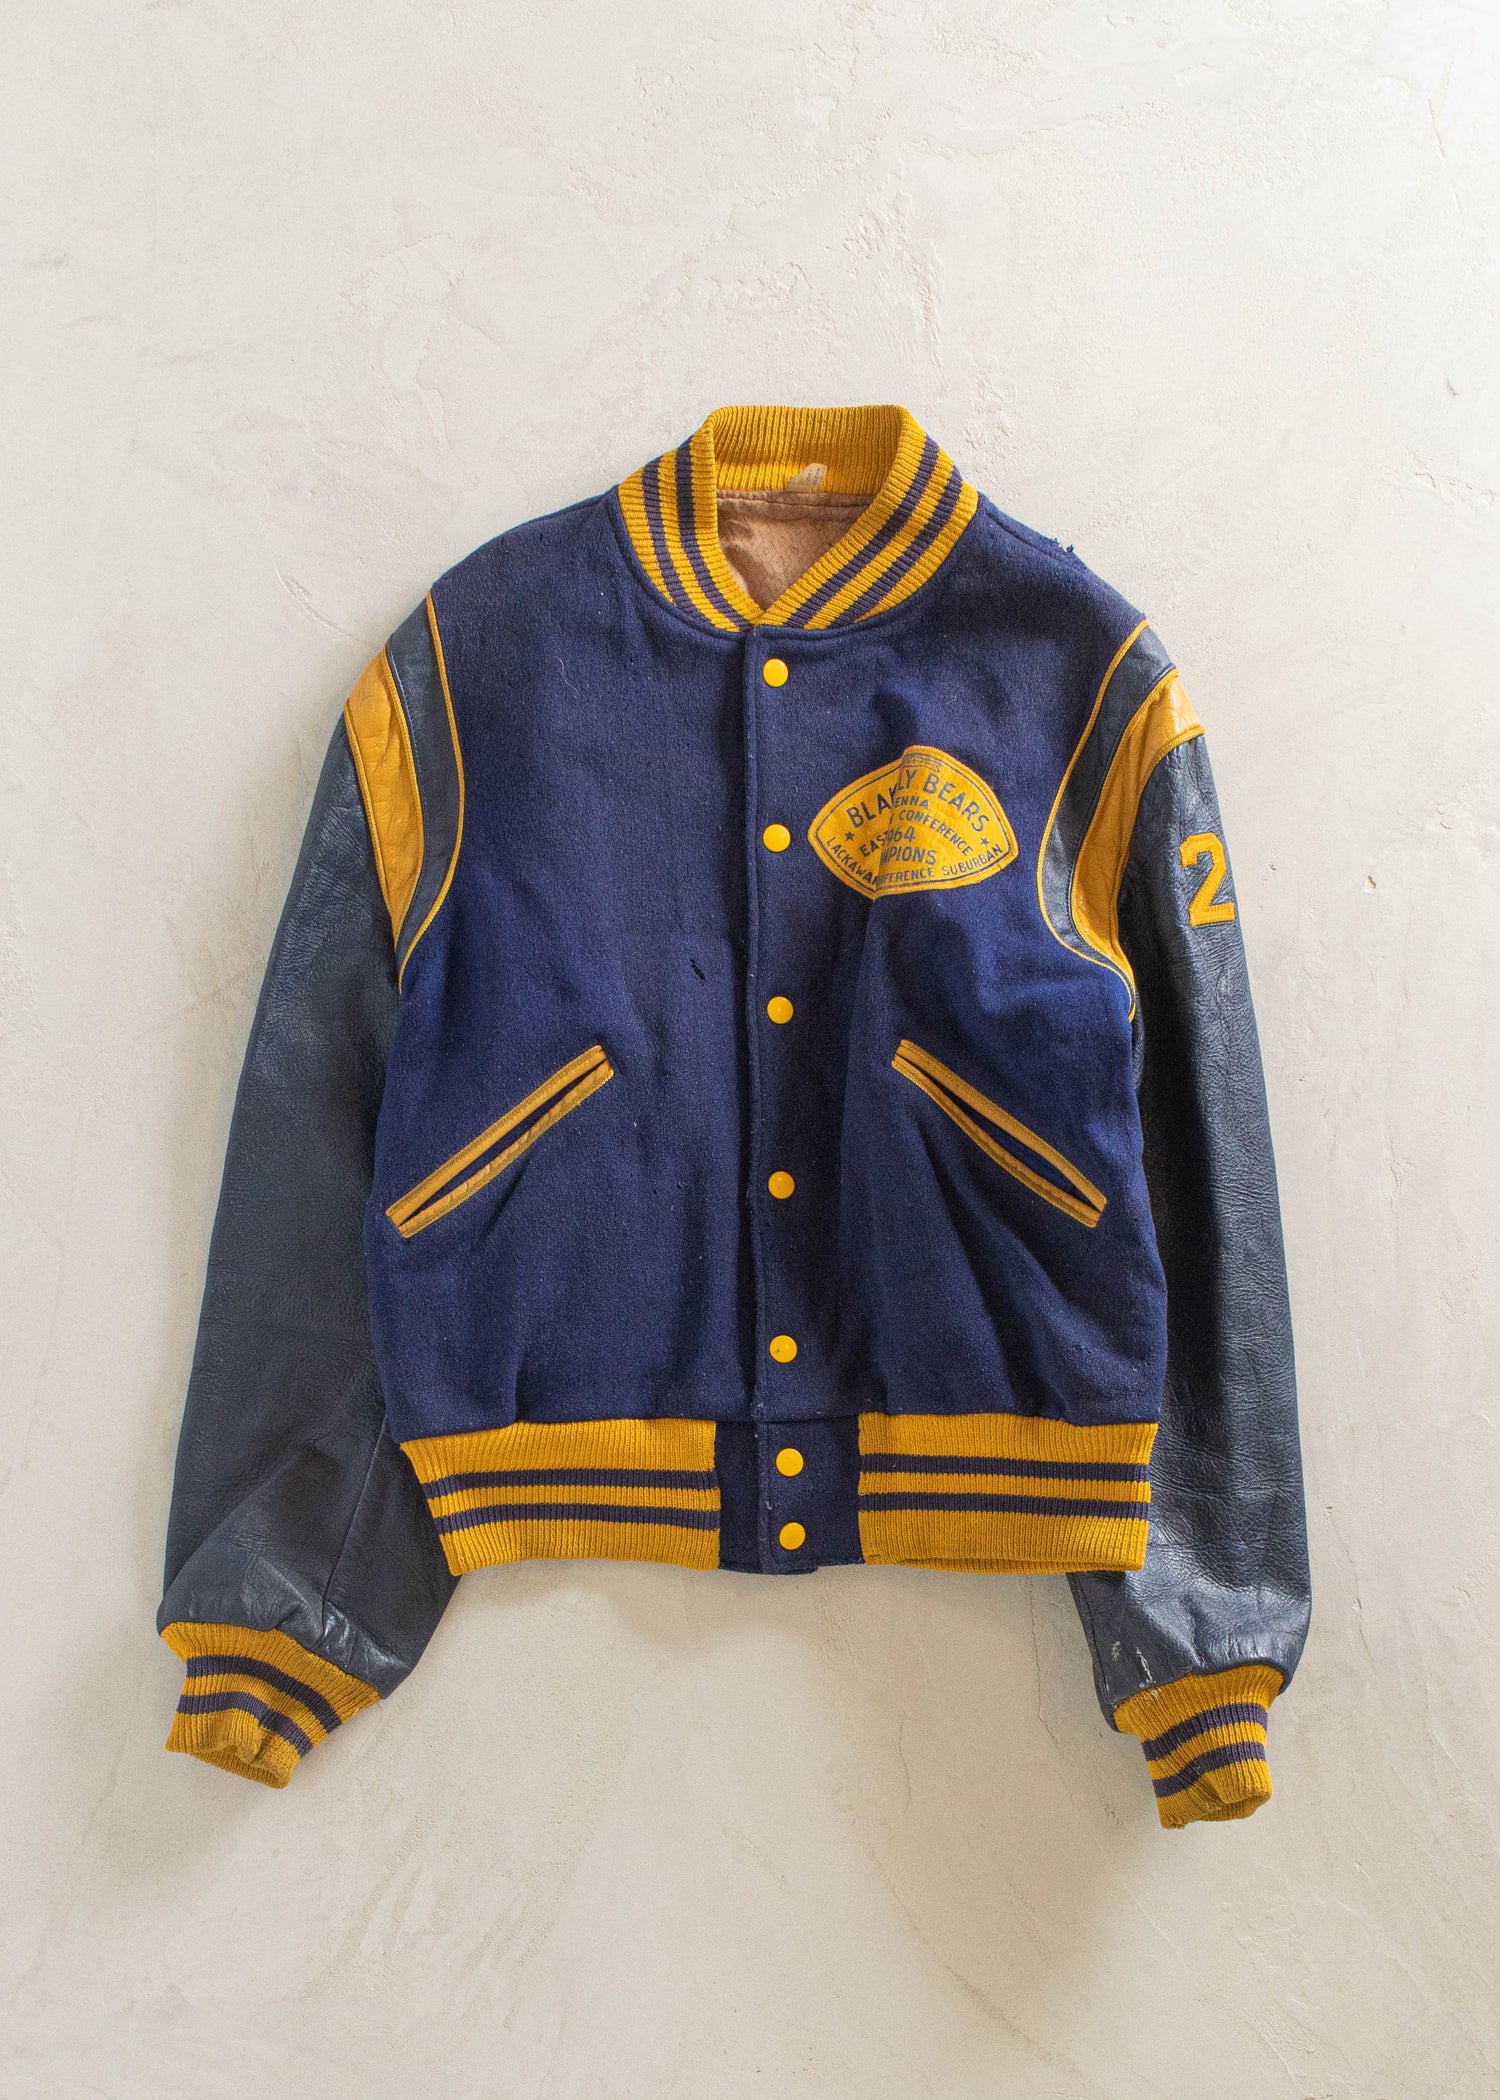 1960s Butwin Blakely Bears Varsity Jacket Size M/L – Palmo Goods